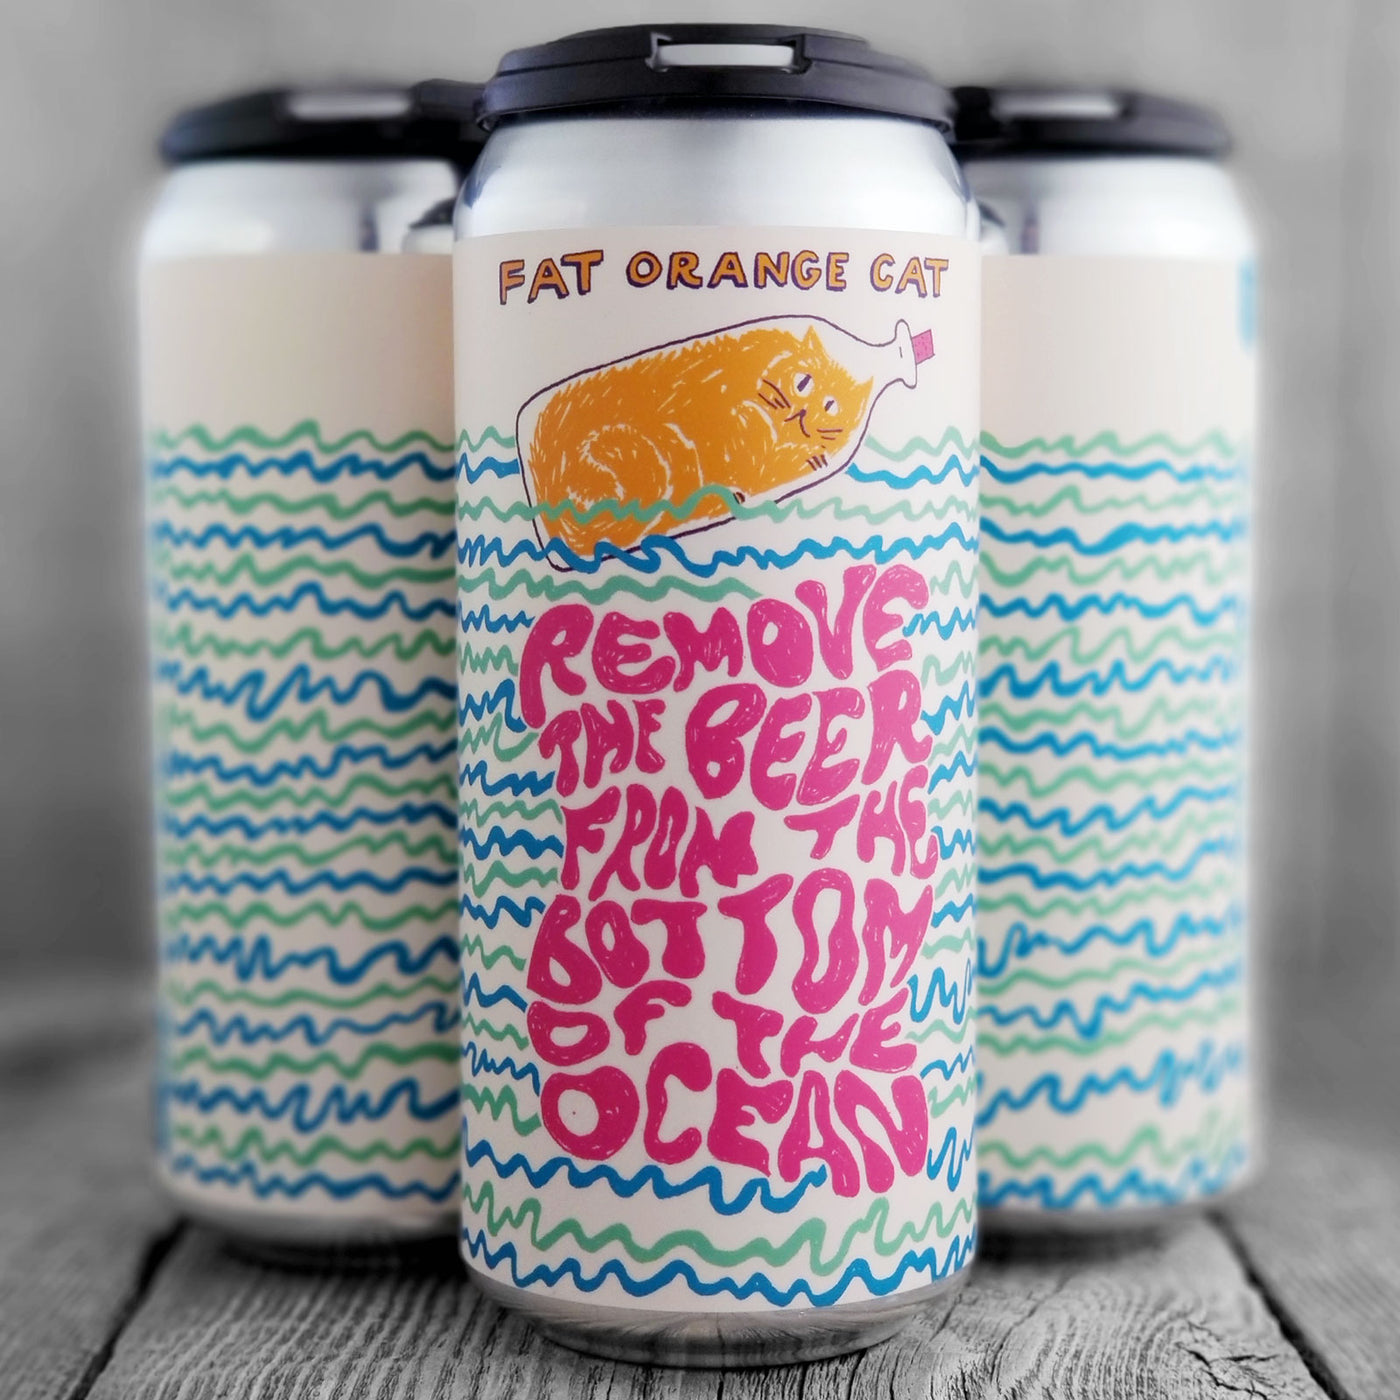 Fat Orange Cat Remove The Beer From The Bottom of The Ocean